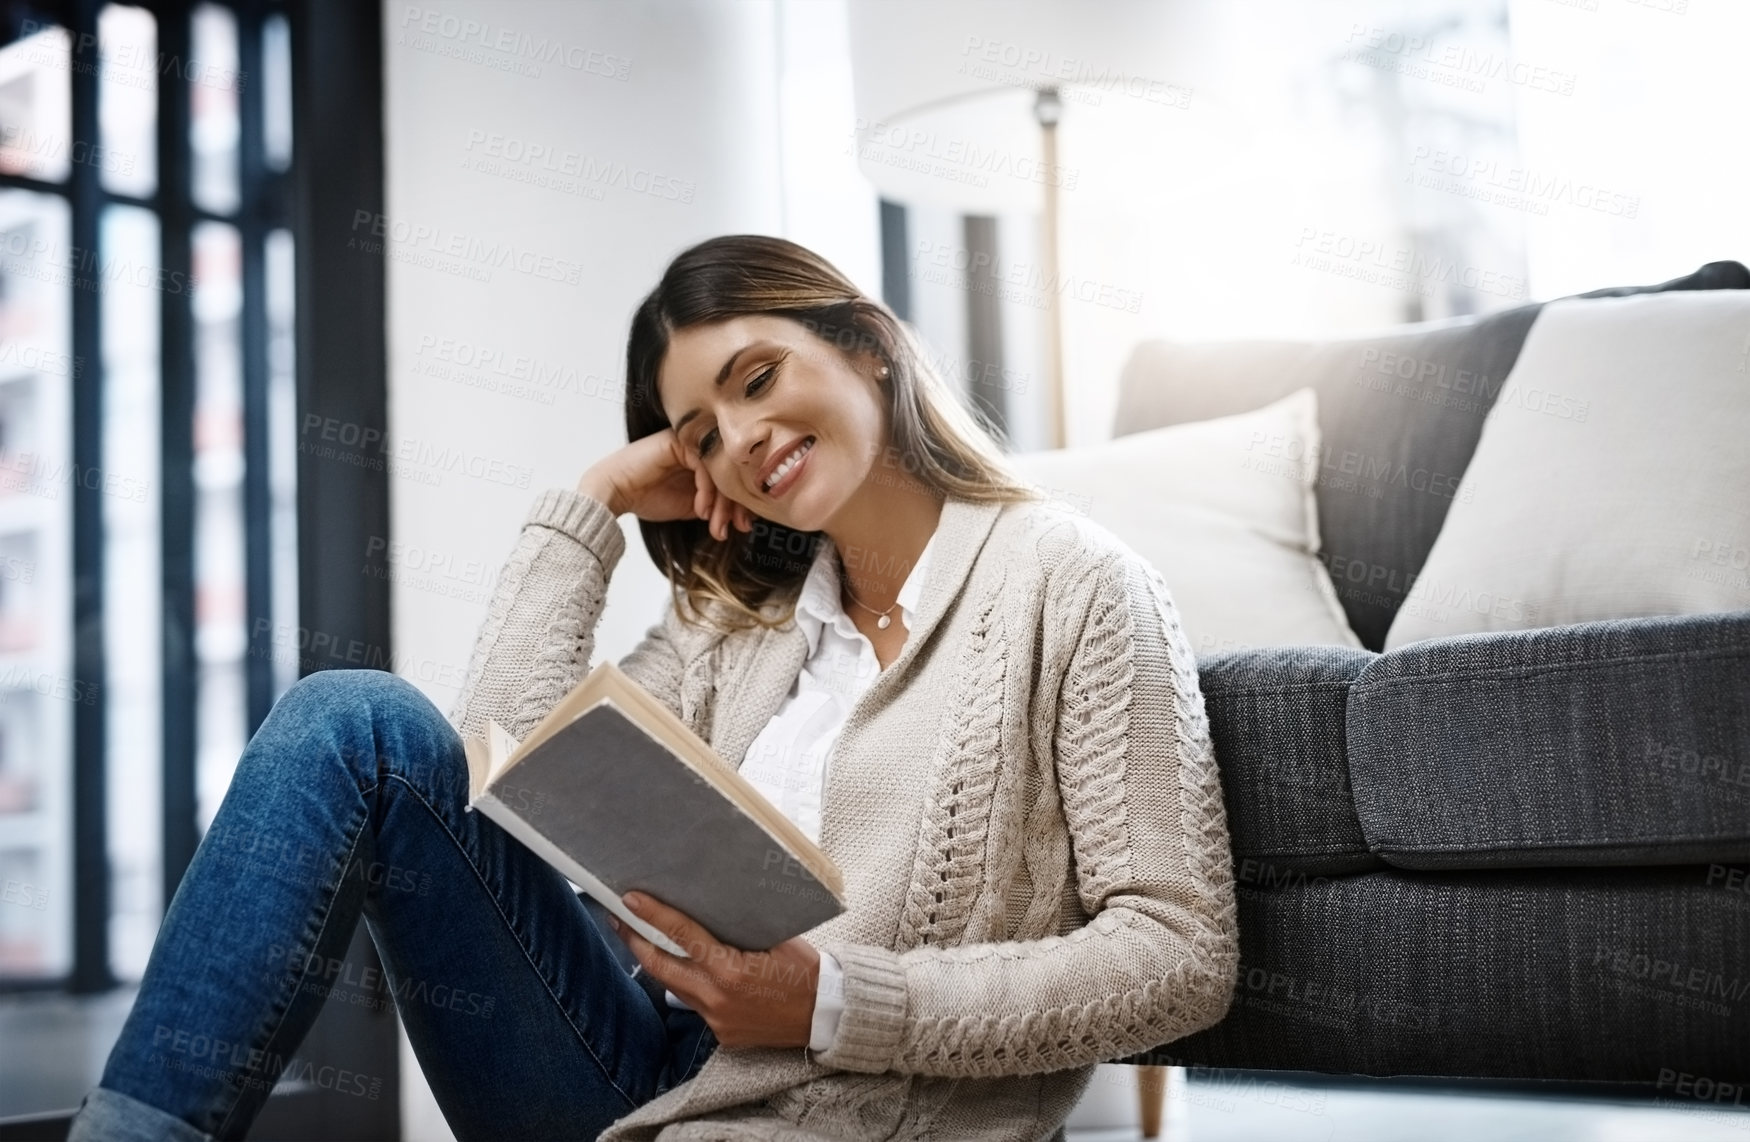 Buy stock photo Cropped shot of a beautiful young woman reading a book while relaxing at home